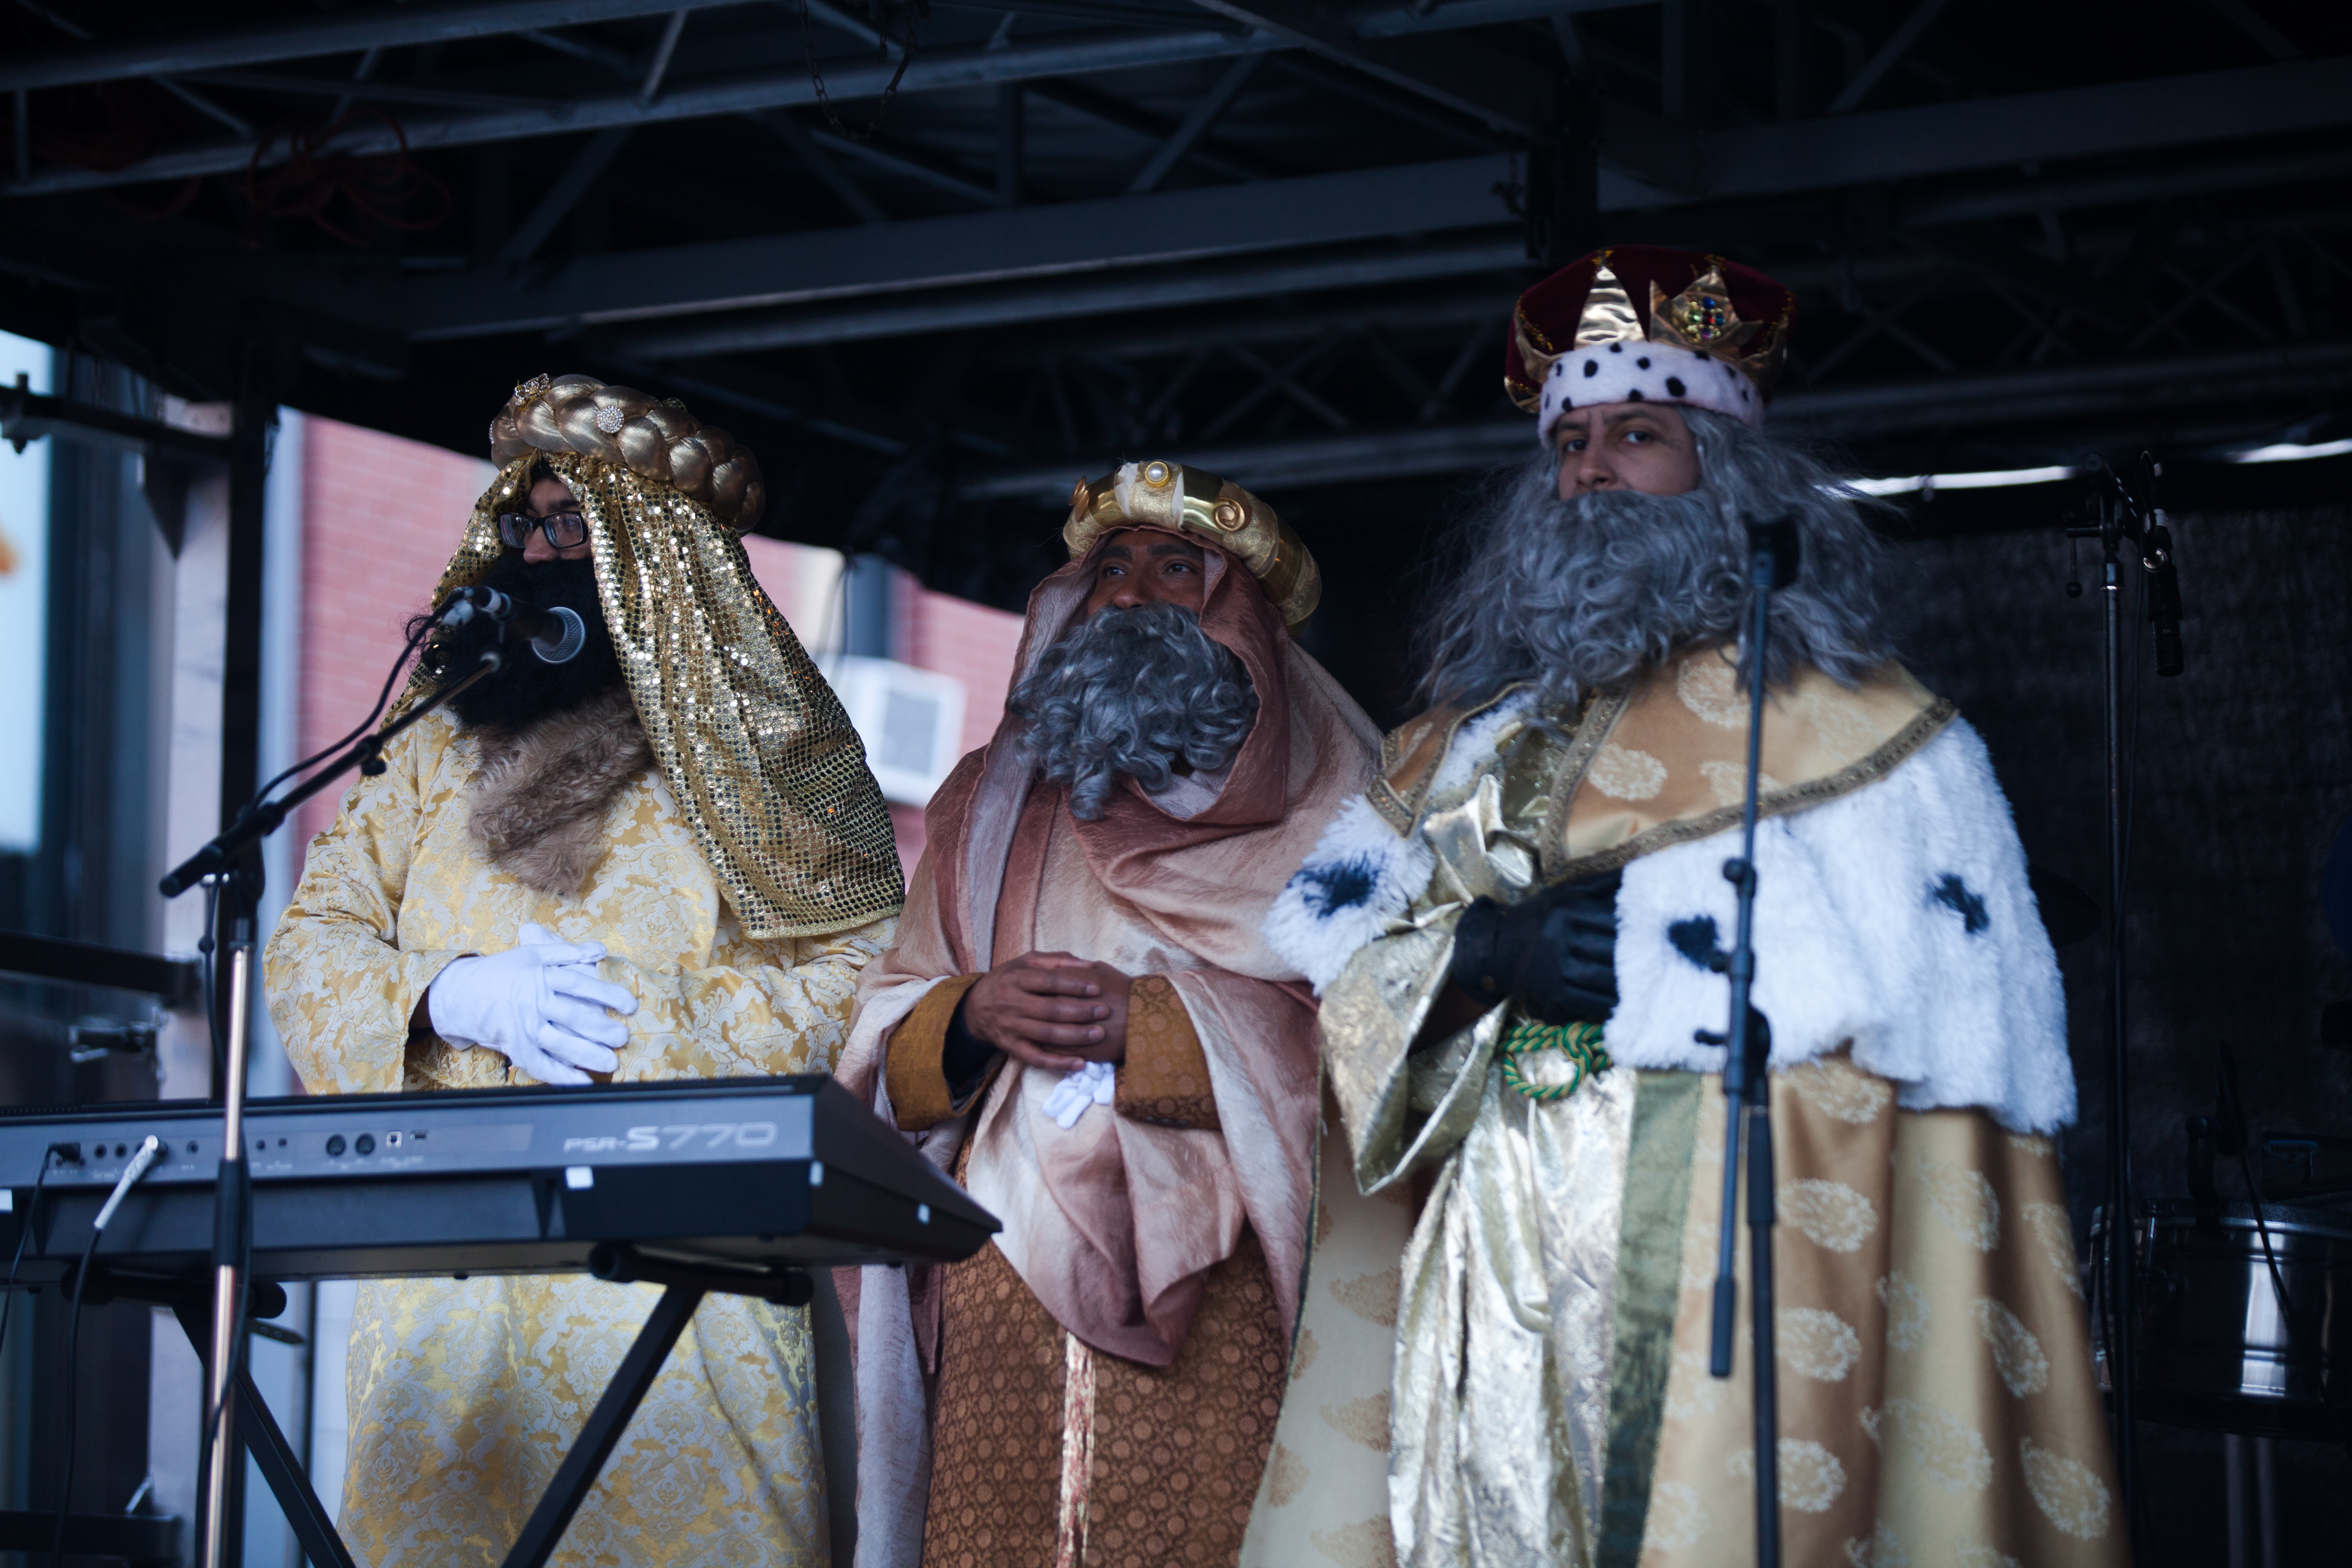 Once the parade got to Broadway, a festival showcased the three kings and celebrated with live music.